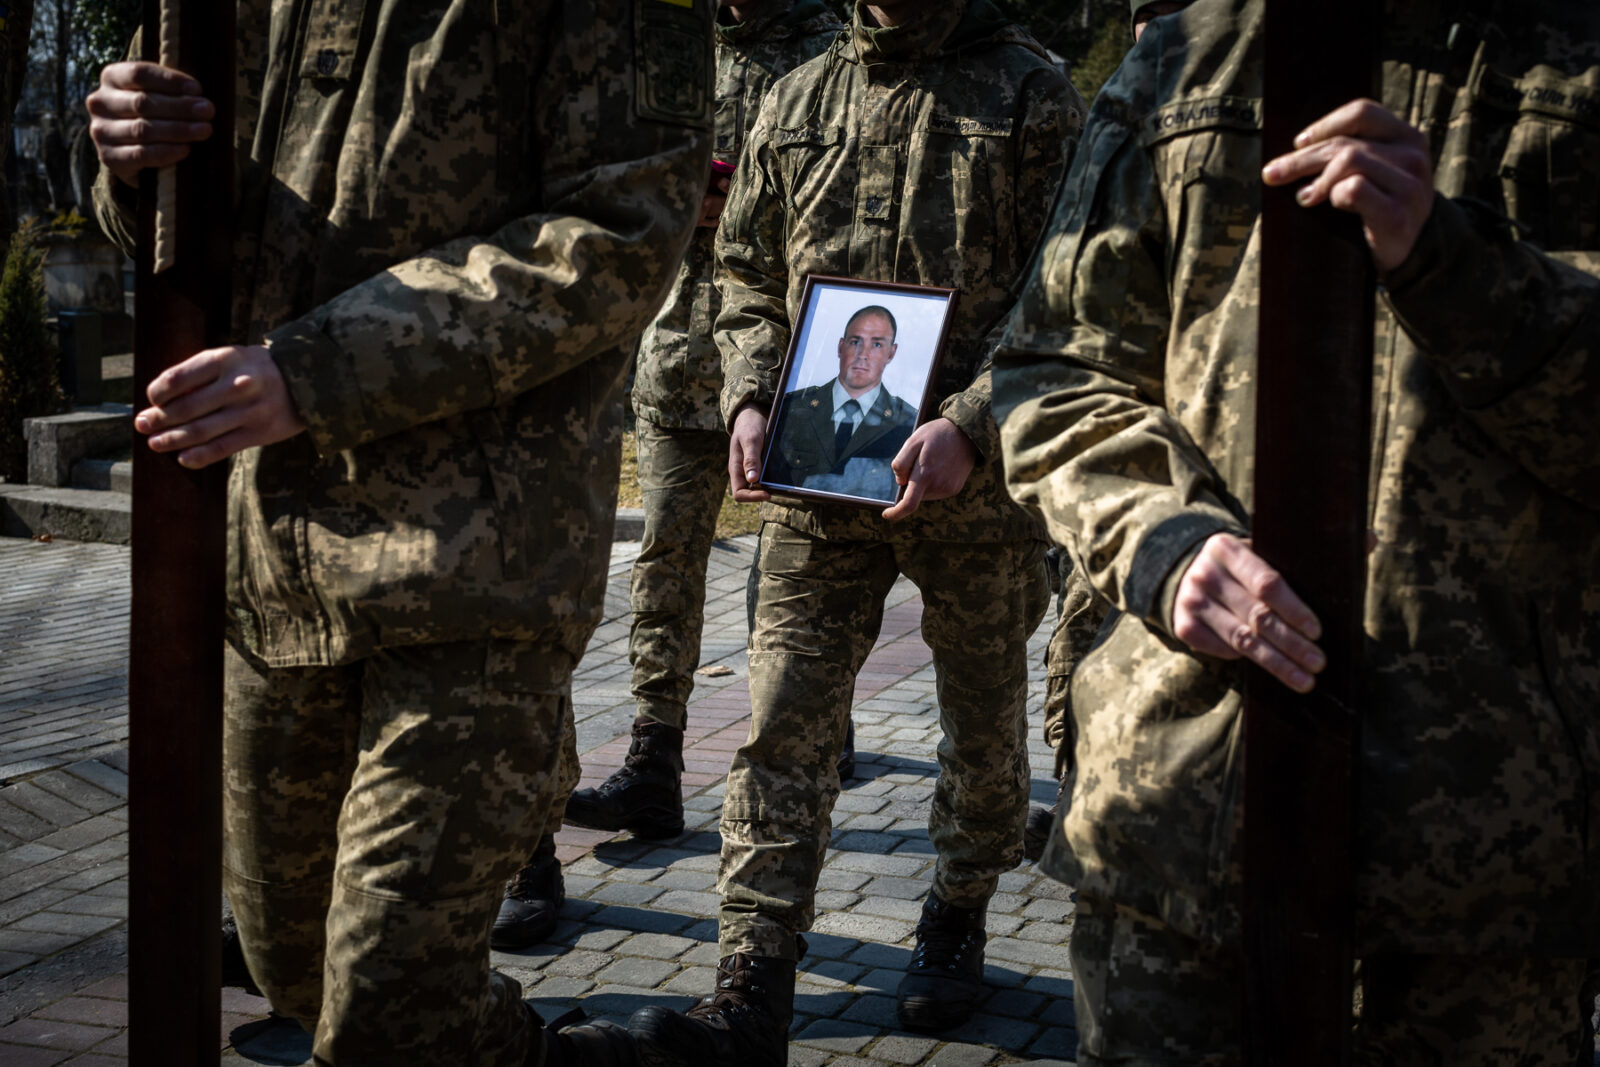 Ukrainian soldiers holding the photo of one of the 35 soldiers killed from the bombing of the International Peacekeeping and Security Center in Yavoriv outside of Lviv near the border with Poland Sunday morning. They were laid to rest at the Lychakiv Cemetery in Lviv, Ukraine.